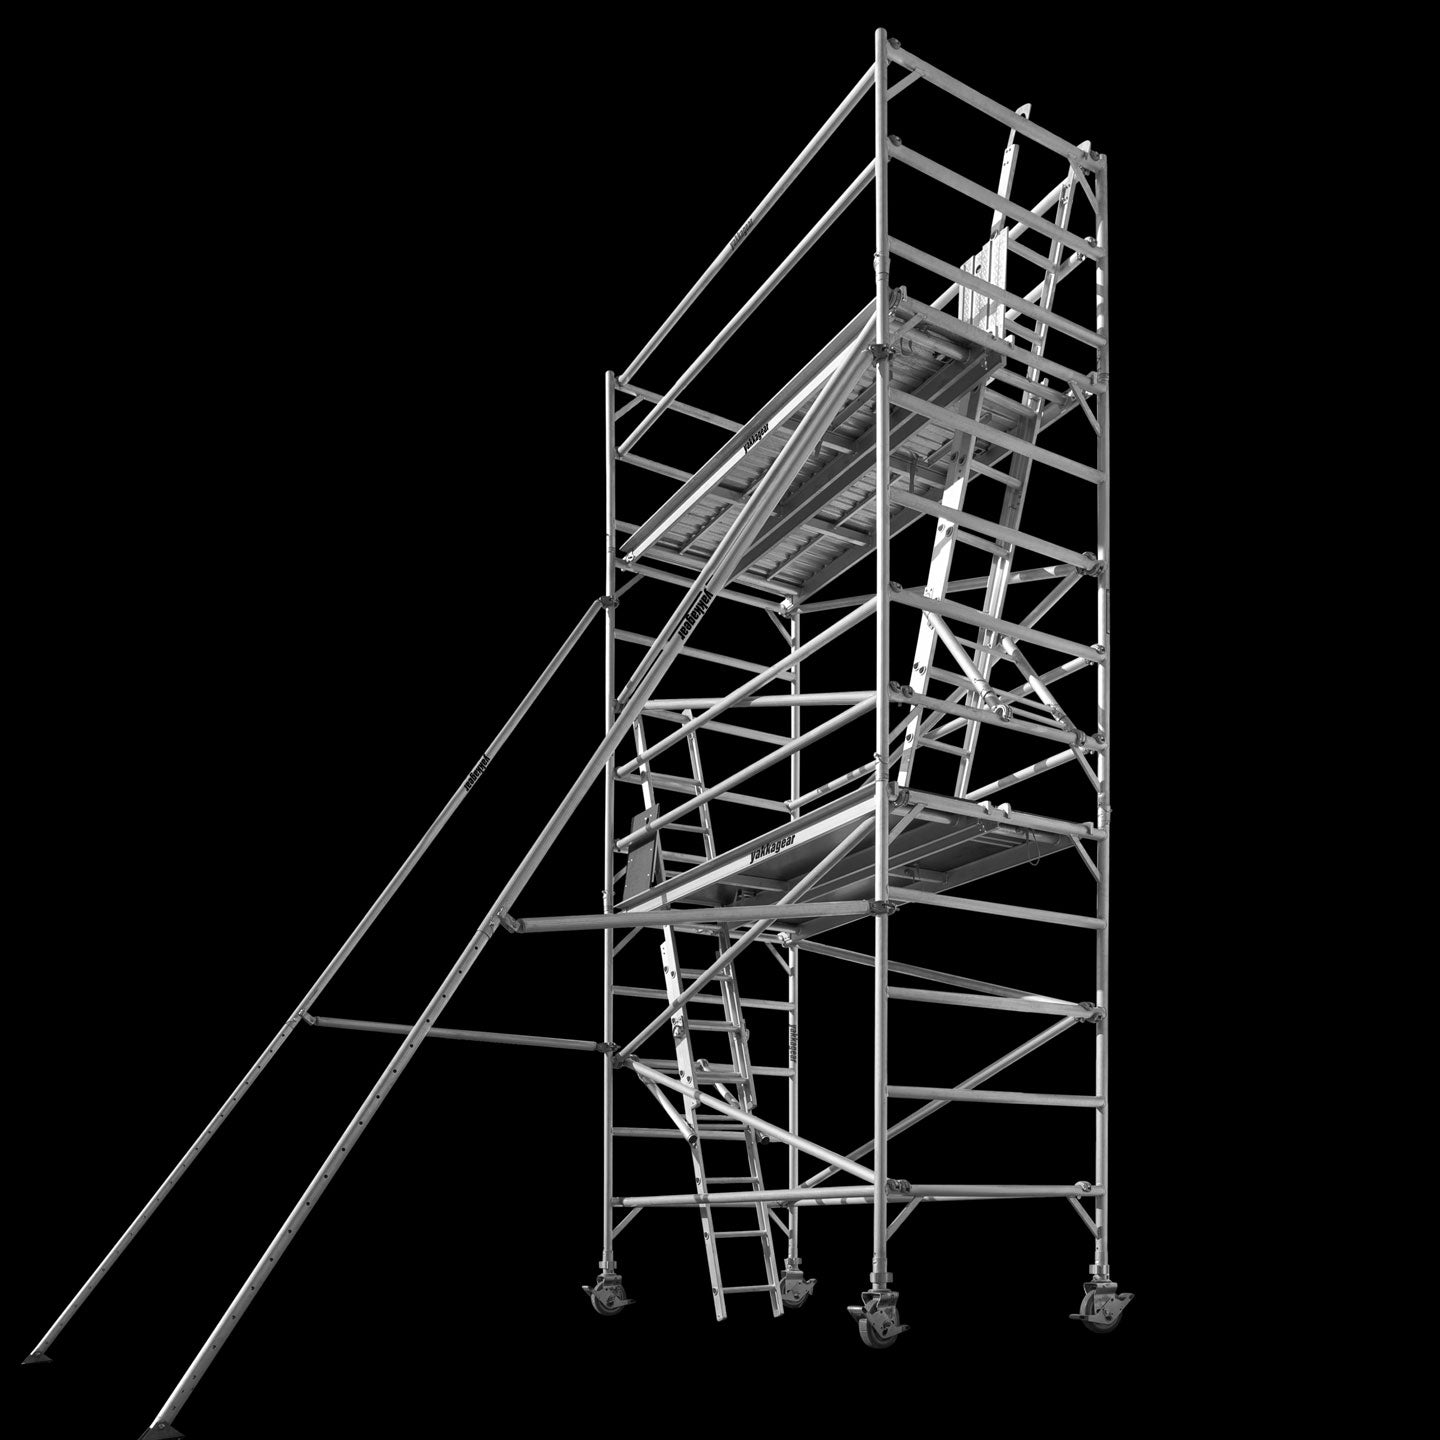 Yakka Gear Australia 2.5m Length 1.3m Wide 6.6m reach wide scaffolding tower access equipment, view from the front side angle. 